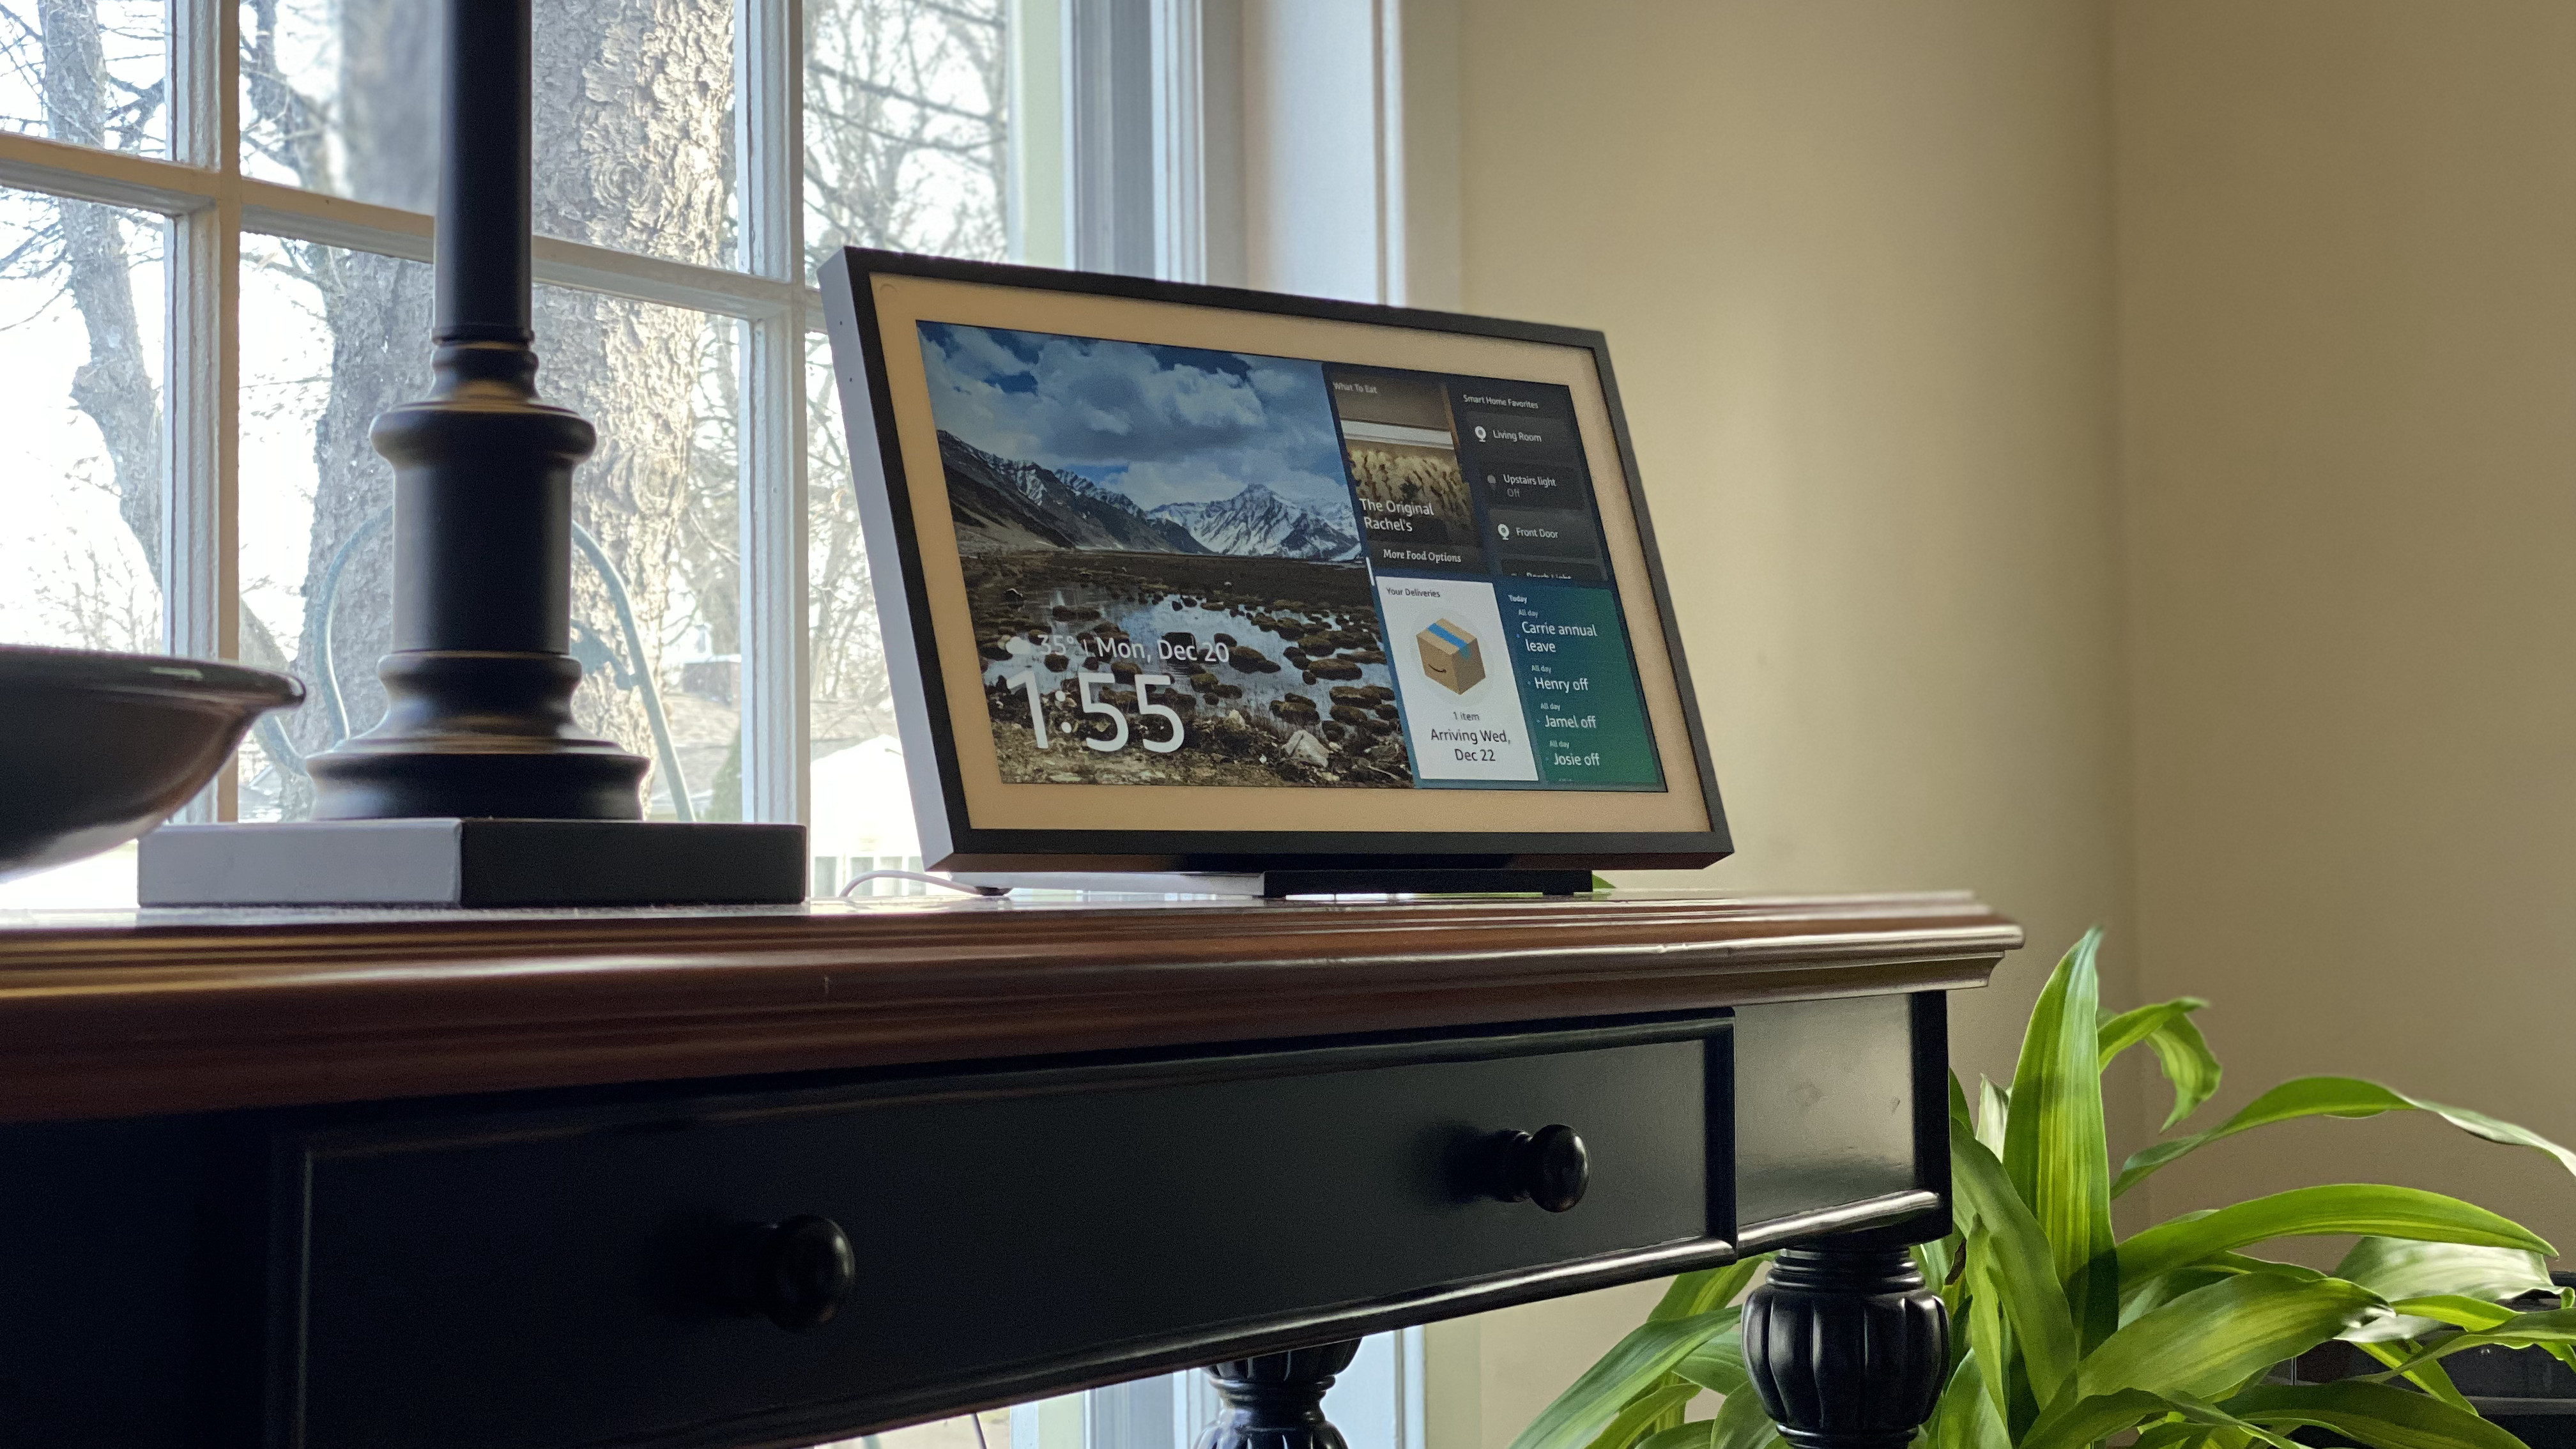 Echo Show 15 is a smart speaker, picture frame, and TV